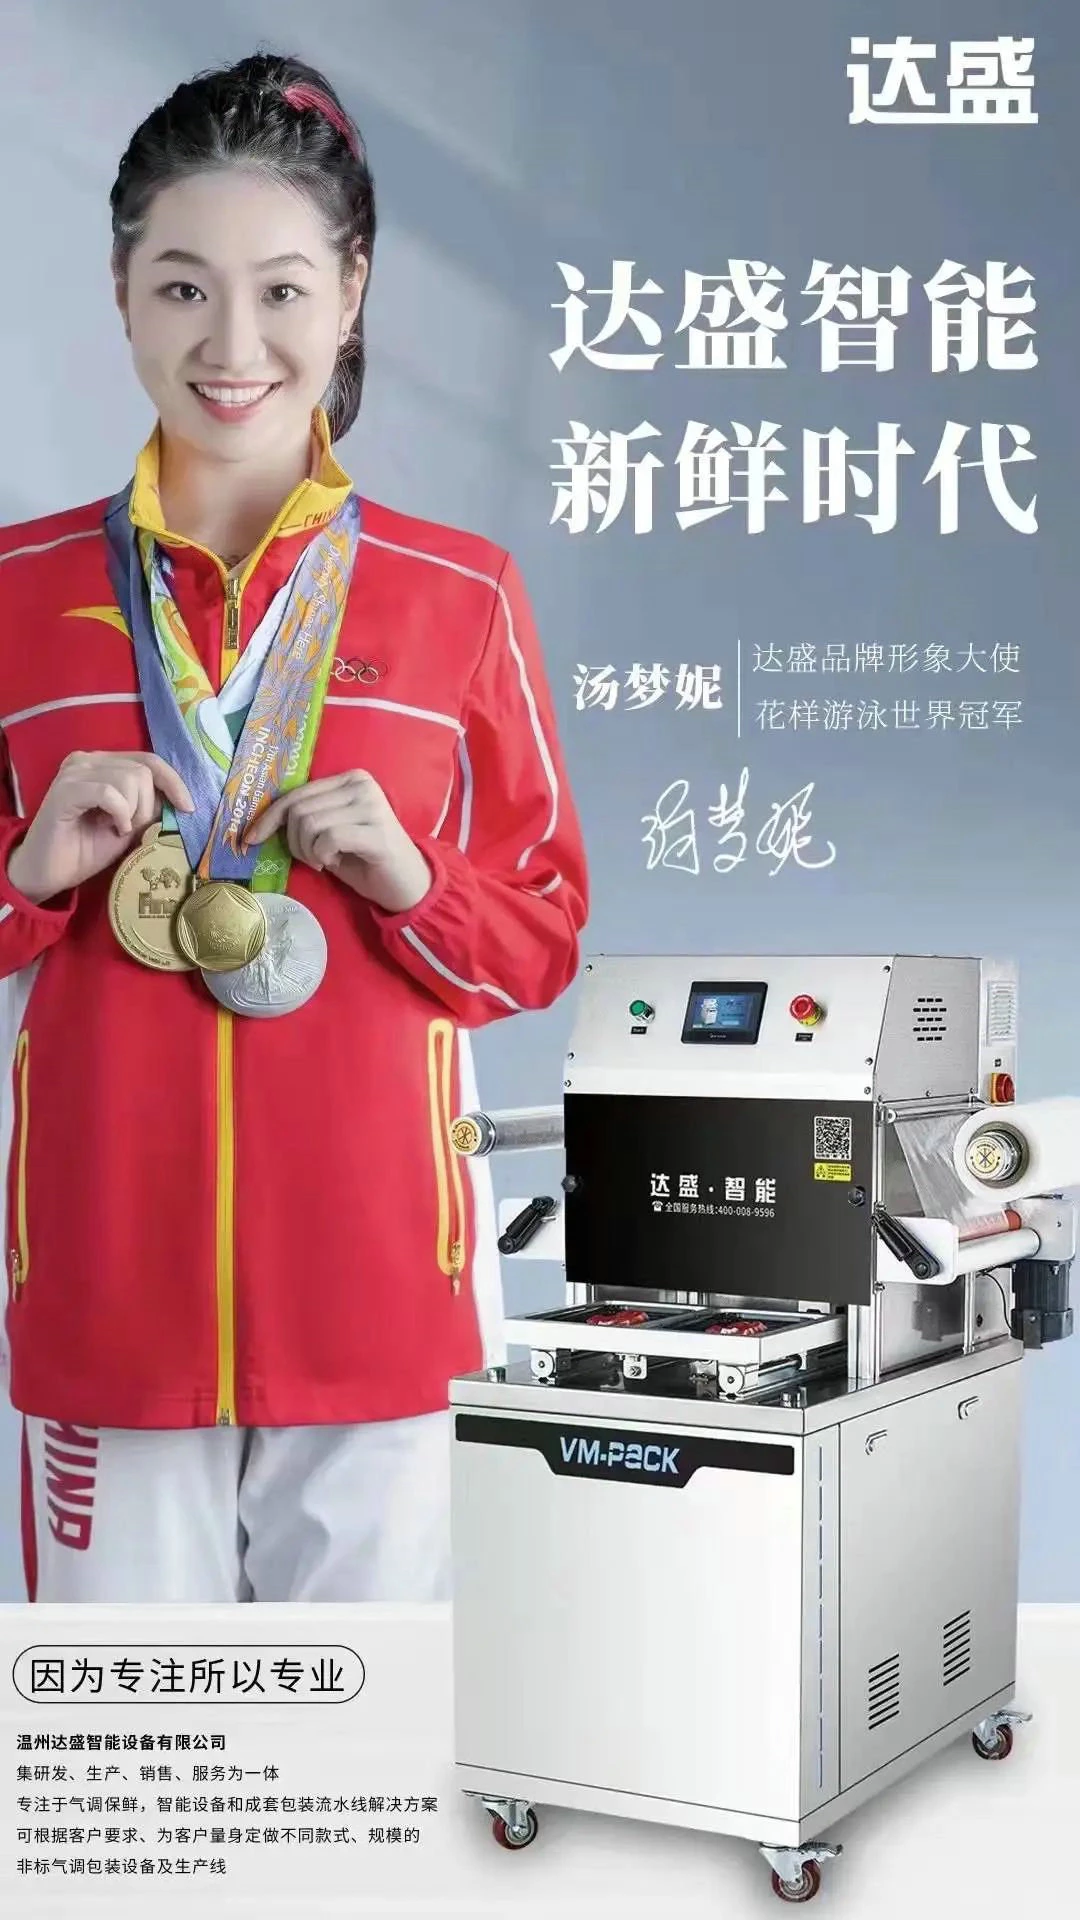 Warmly congratulate the world champion "Tang Mengni" on signing Dasheng Intelligent